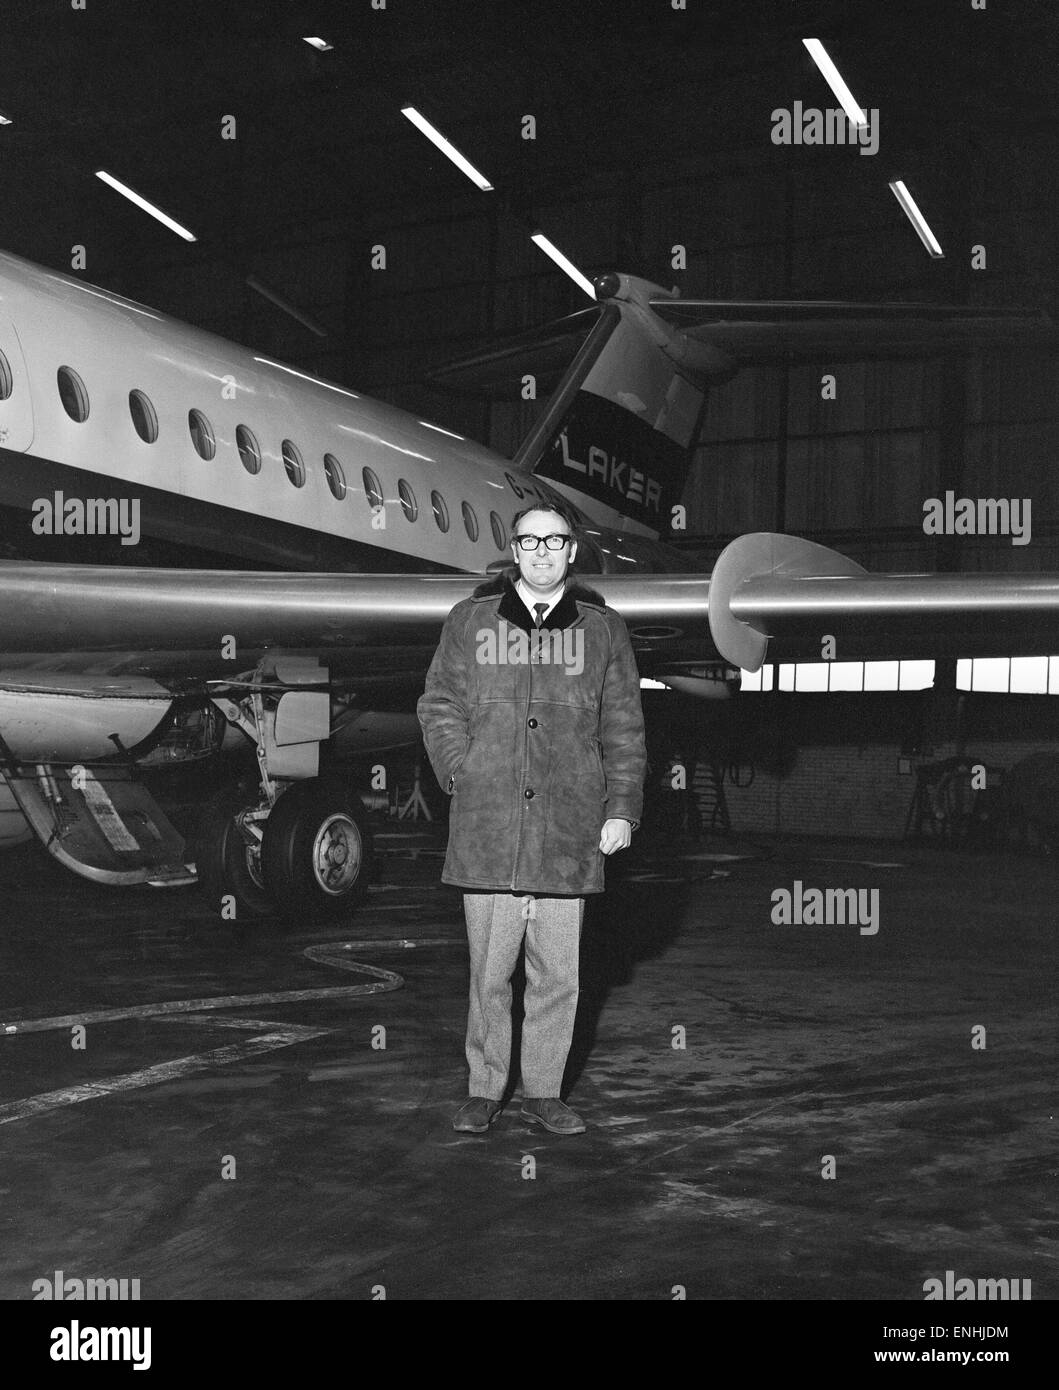 British airline entrepreneur Freddie Laker pictured beside one of his planes. 22nd February 1969. Stock Photo